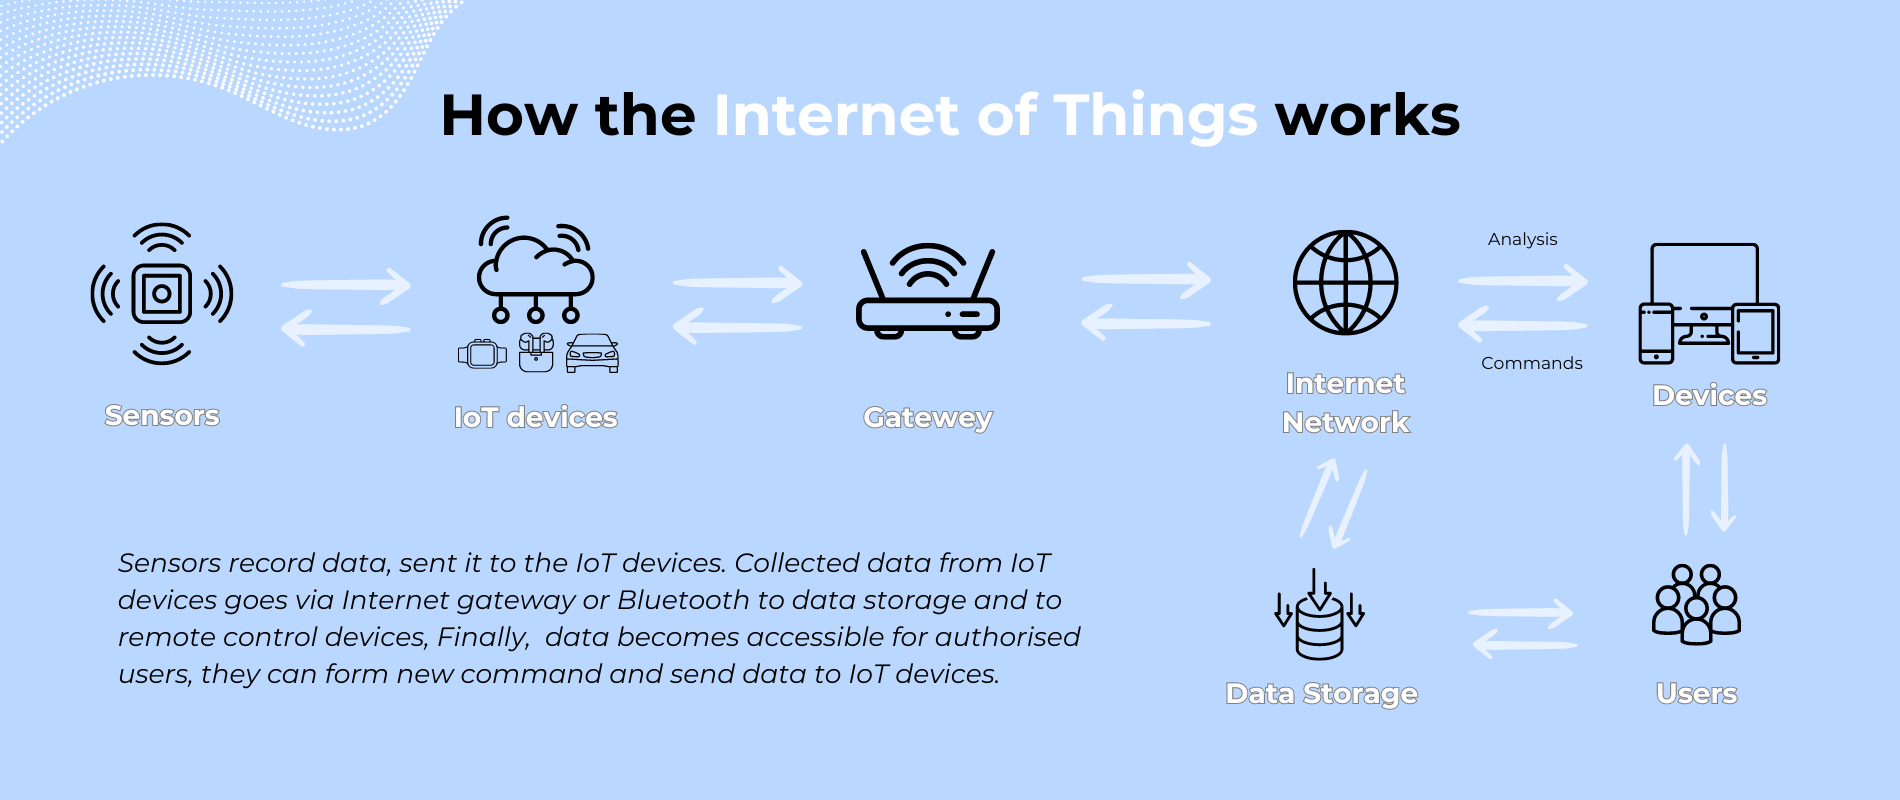 How does IoT work